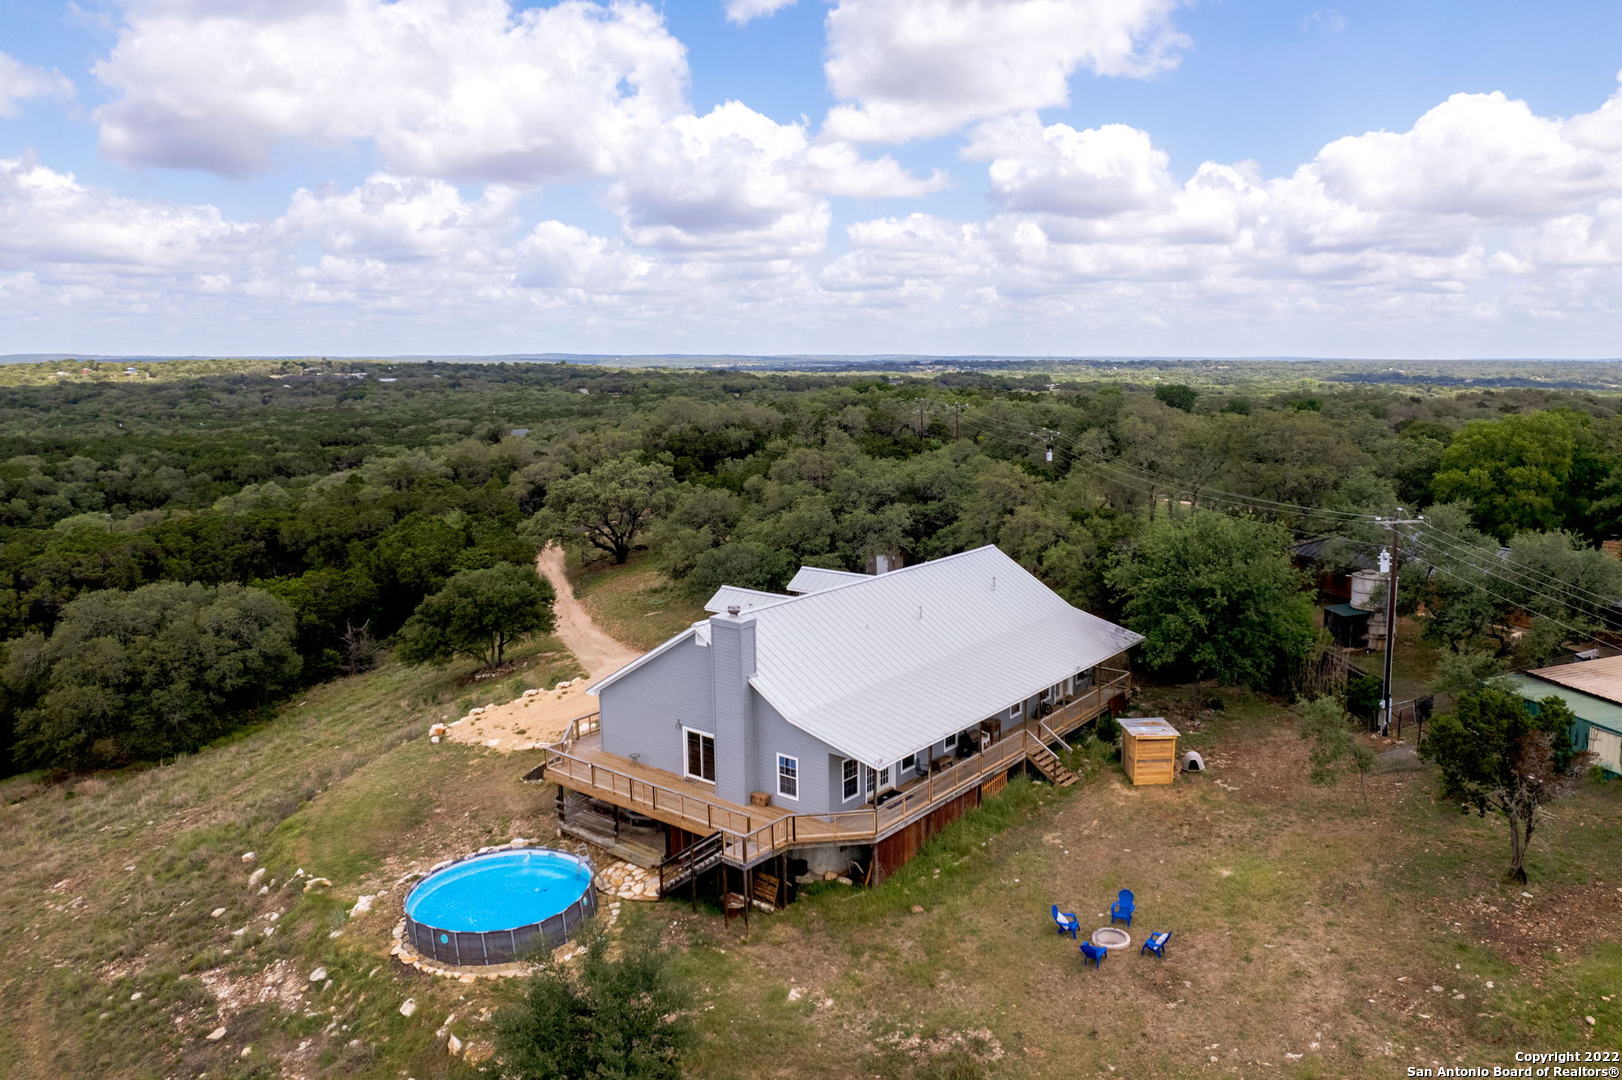 If breath taking views and hill country living are what your heart desires, here it is! Just under 10 acres, UNRESTRICTED (can be used as a short-term rental) close to New Braunfels and Canyon Lake. 6 bedrooms, 4 baths and a game room, offers tons of space for family fun! Home has had many updates including the following - metal roof, newly painted exterior and new well pump, all new pipe inside existing casing, replaced wiring and pressure switch on the pressure tank.